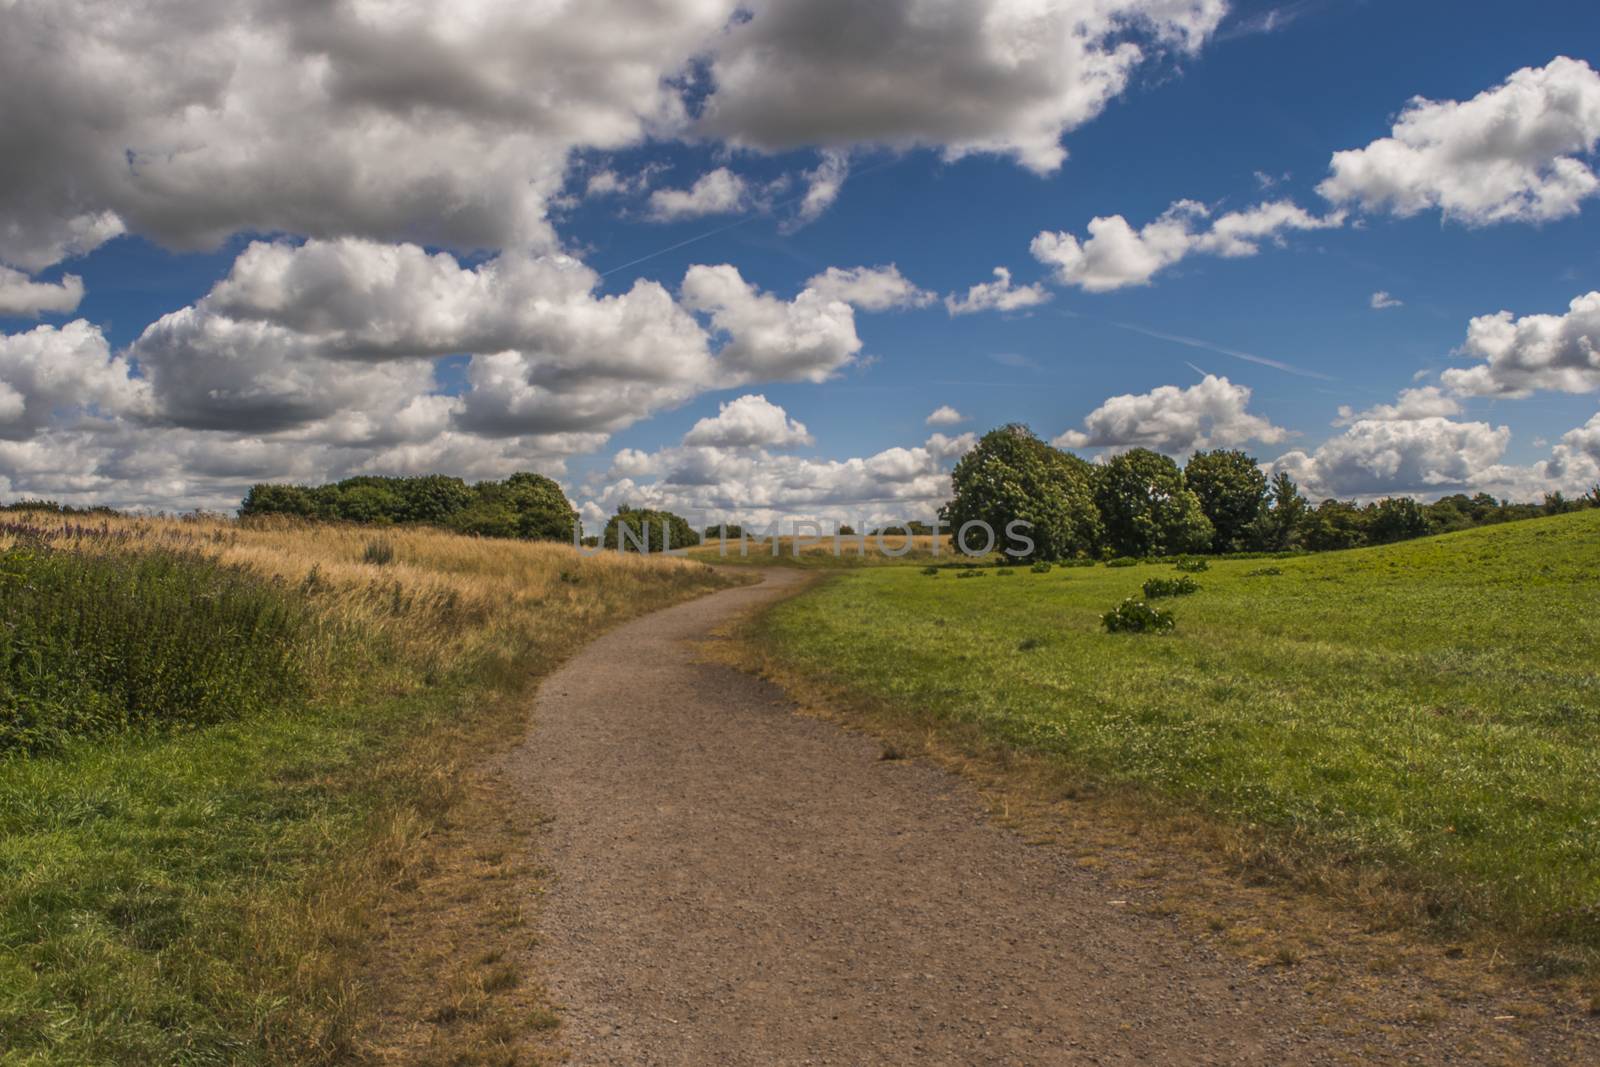 Landscape of a woodland area park with tall grass and trees with a wooden posts and rope fence along side a gravel walkway and a blue sky with fluffy white clouds in the background